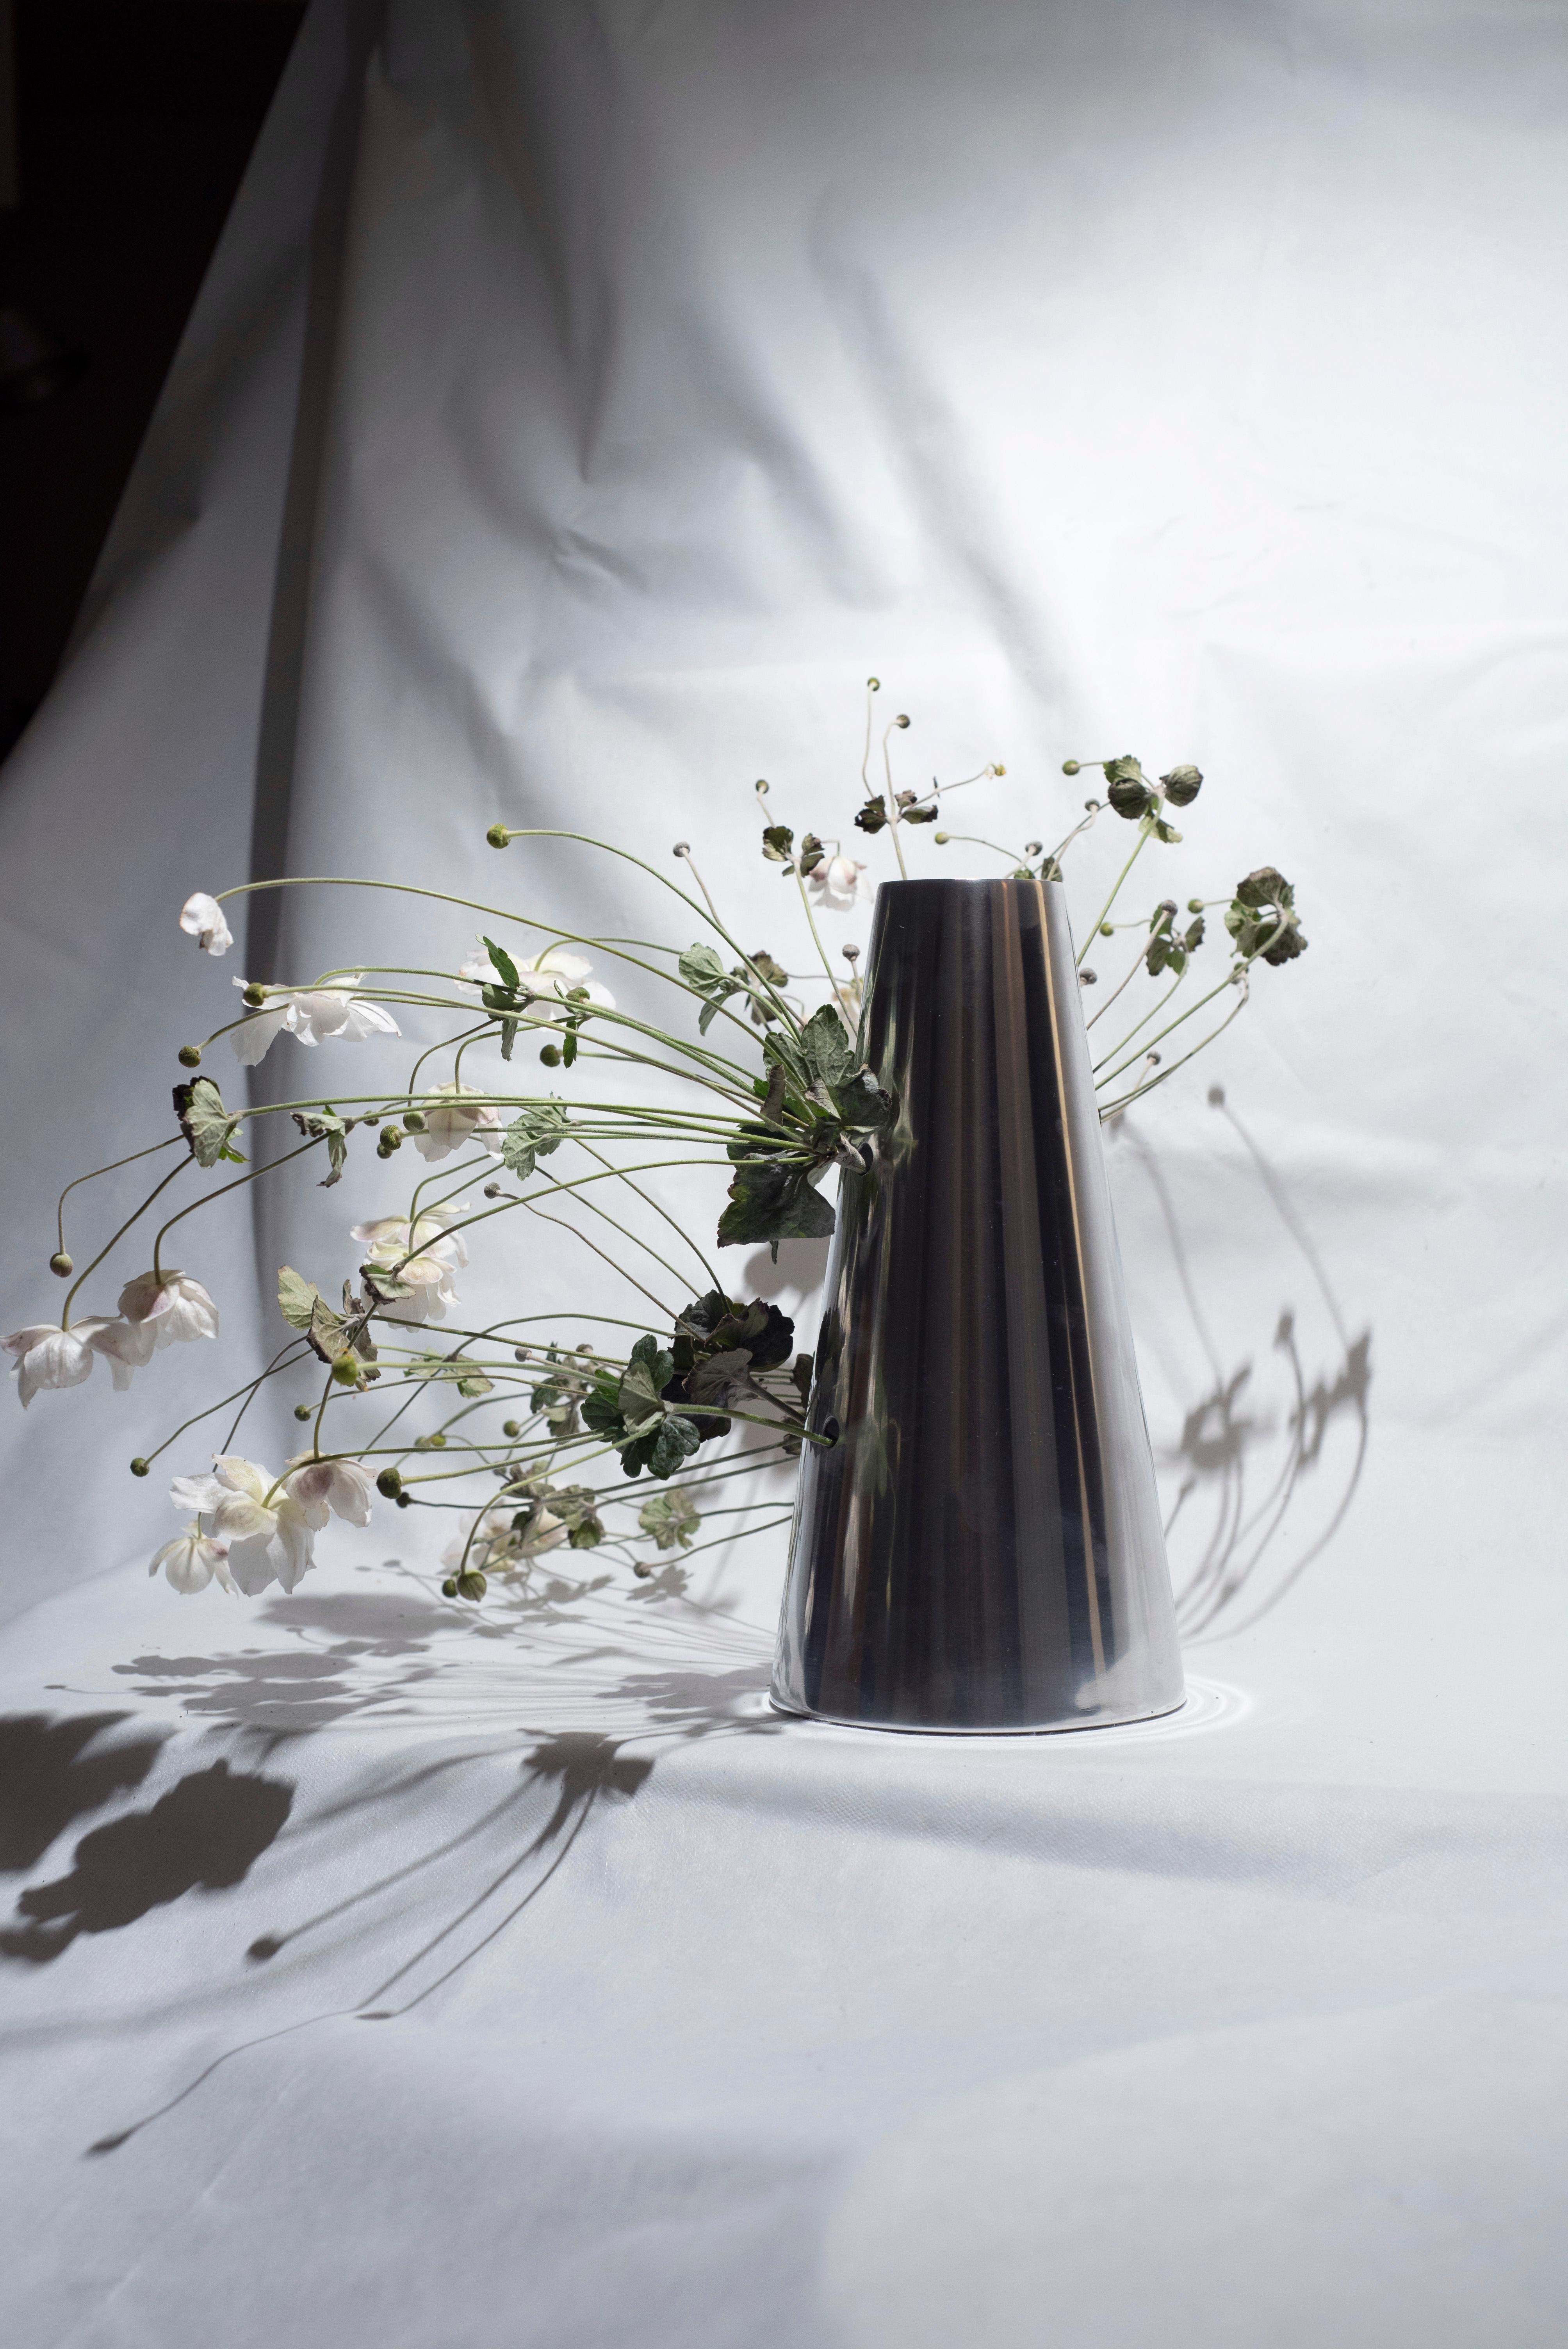 C001 is a high polished aluminium vase with side perforations that work as alternative overtures for the flowers it is build to contain. Inspired by the Japanese art of Ikebana and Spanish Almorratxes, pinasaan is a series of metal vases drawing on